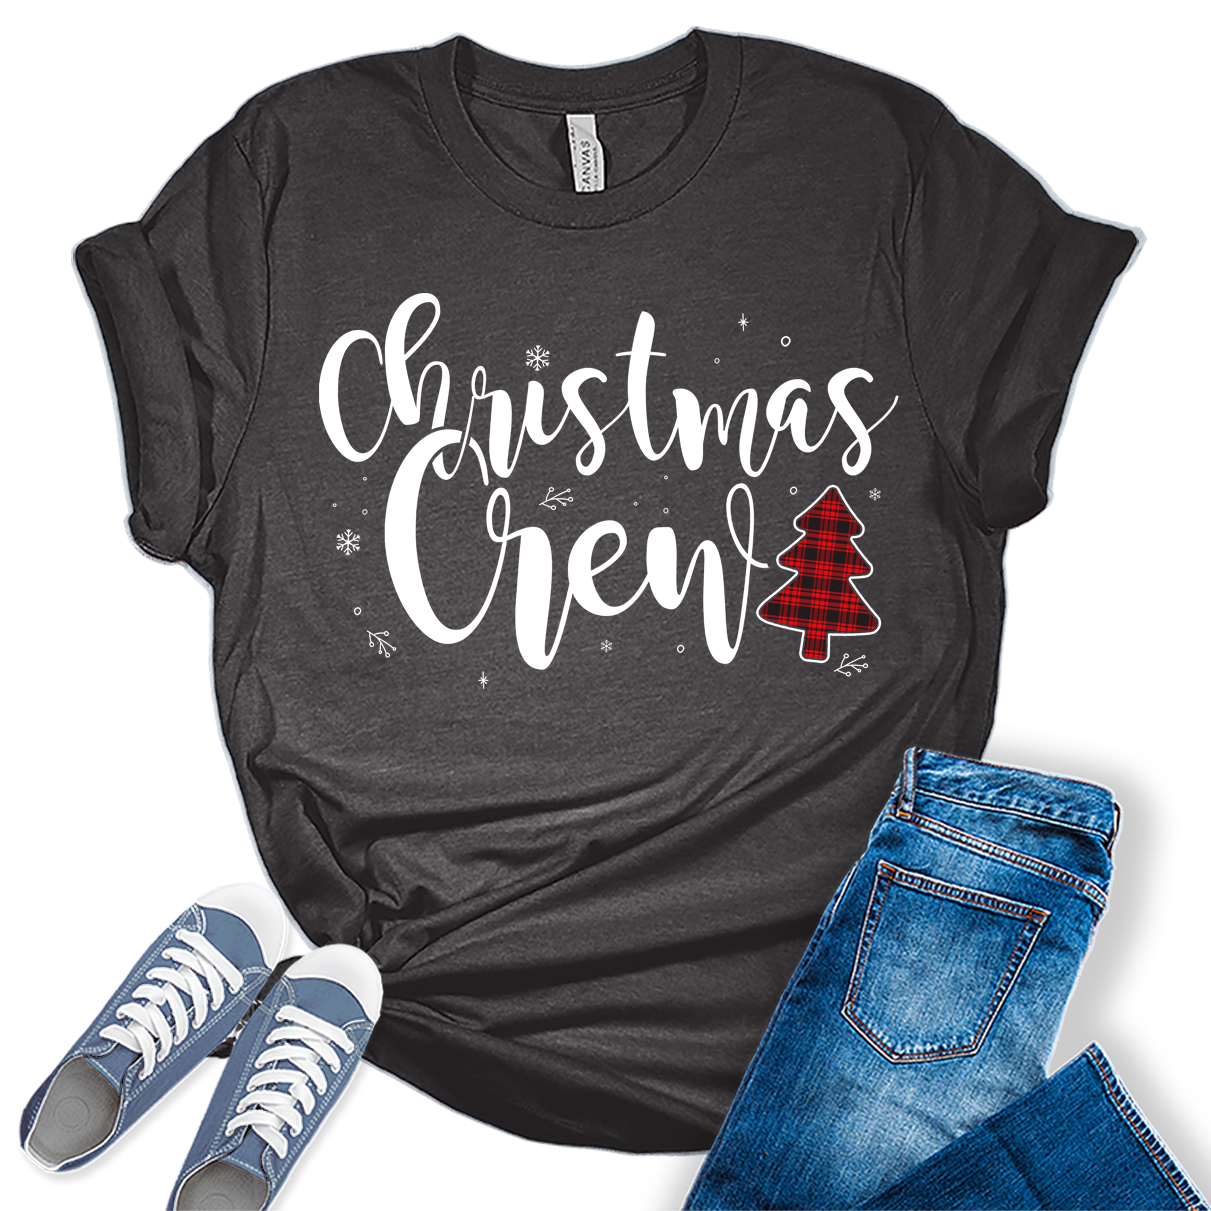 Christmas Crew Shirts For Women's Graphic Tee